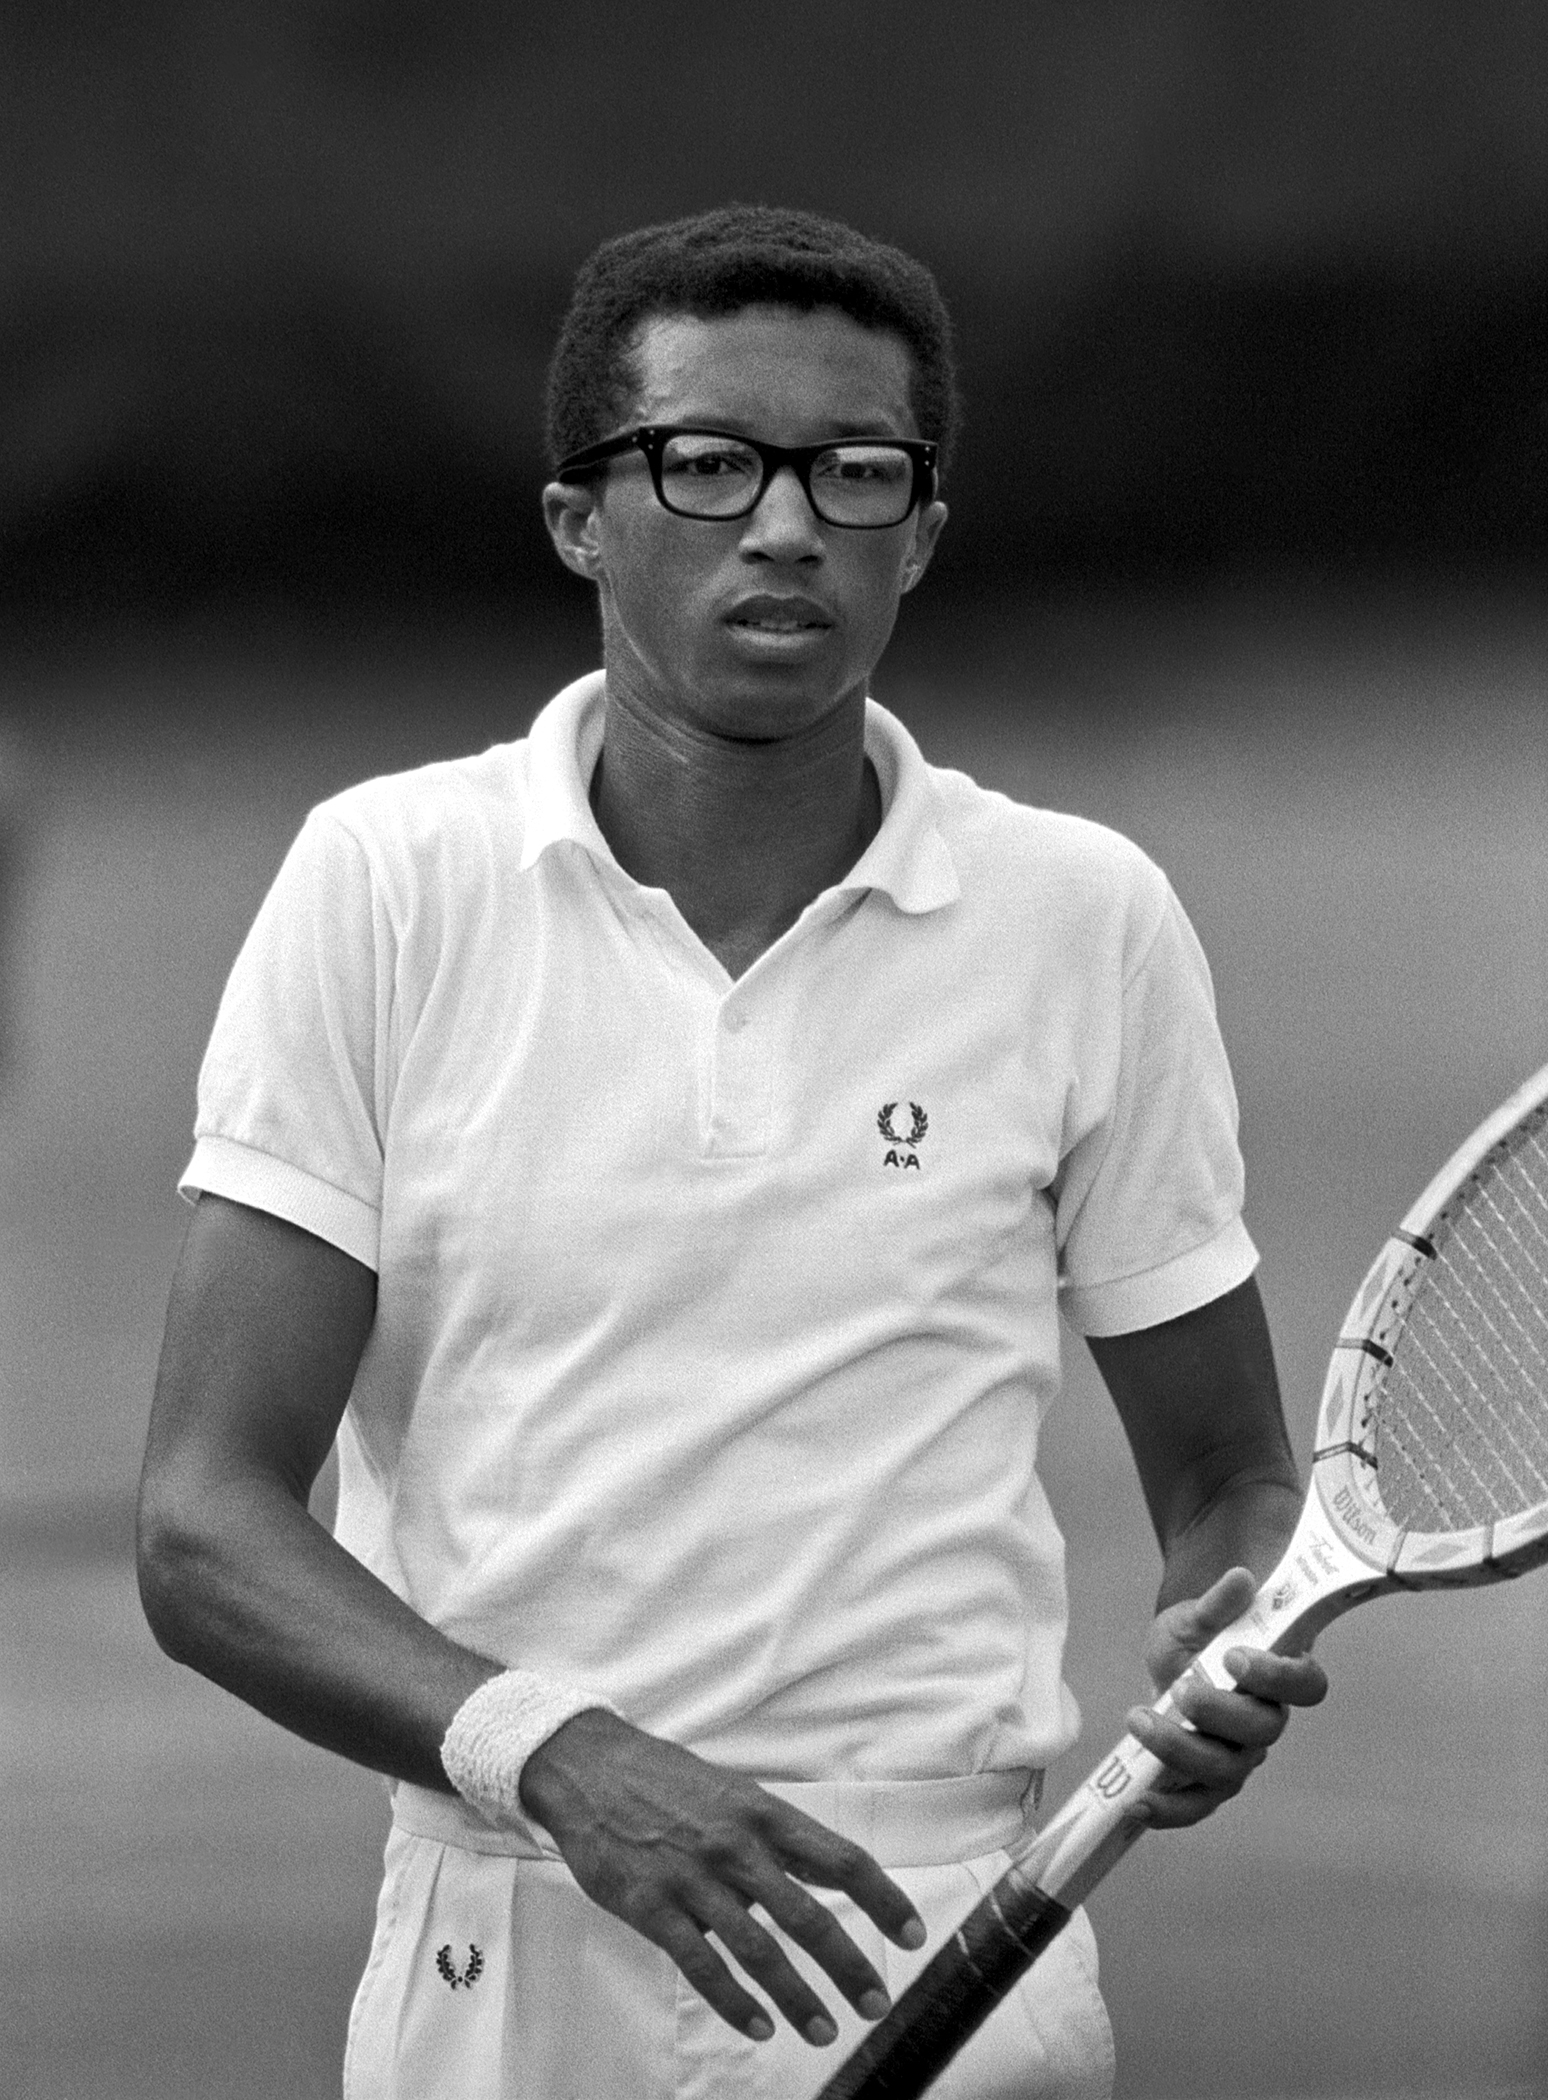 American tennis player Arthur Ashe (1943 - 1993) playing in the US Open final against Tom Okker of the Netherlands. West Side Tennis Club, Forest Hills, New York, September 9, 1968. Photographer John G. Zimmerman